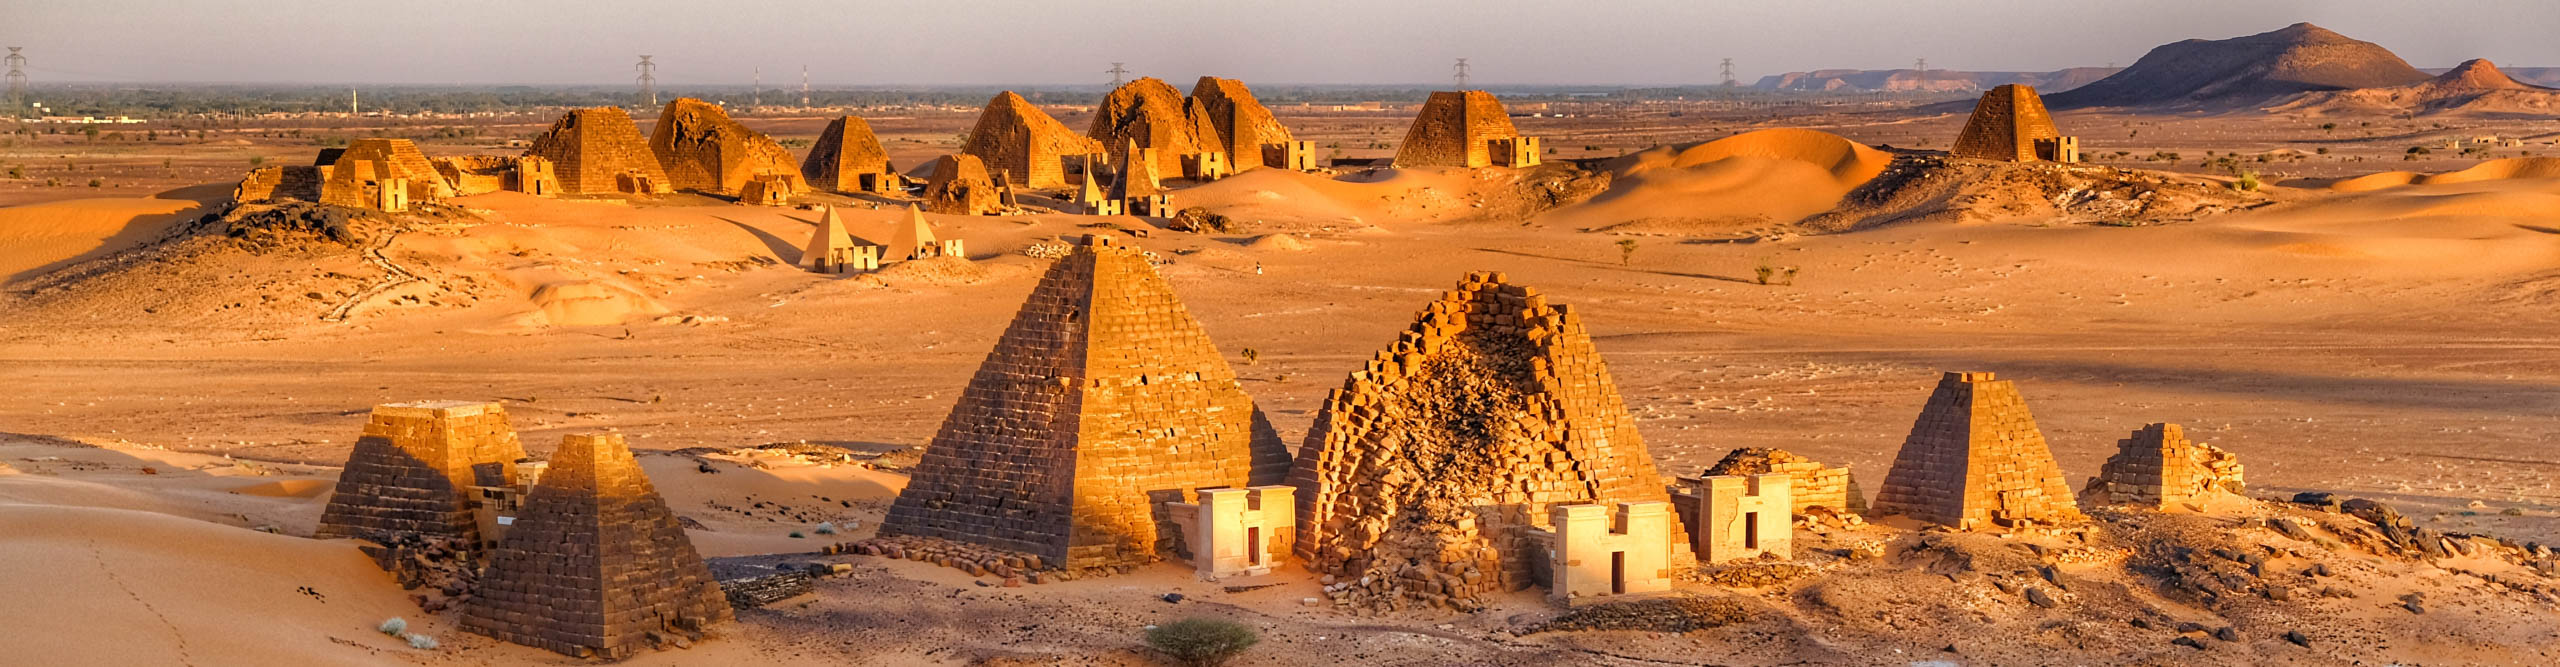 The Pyramids of Meroe at sunset glowing orange in the Sudanese desert